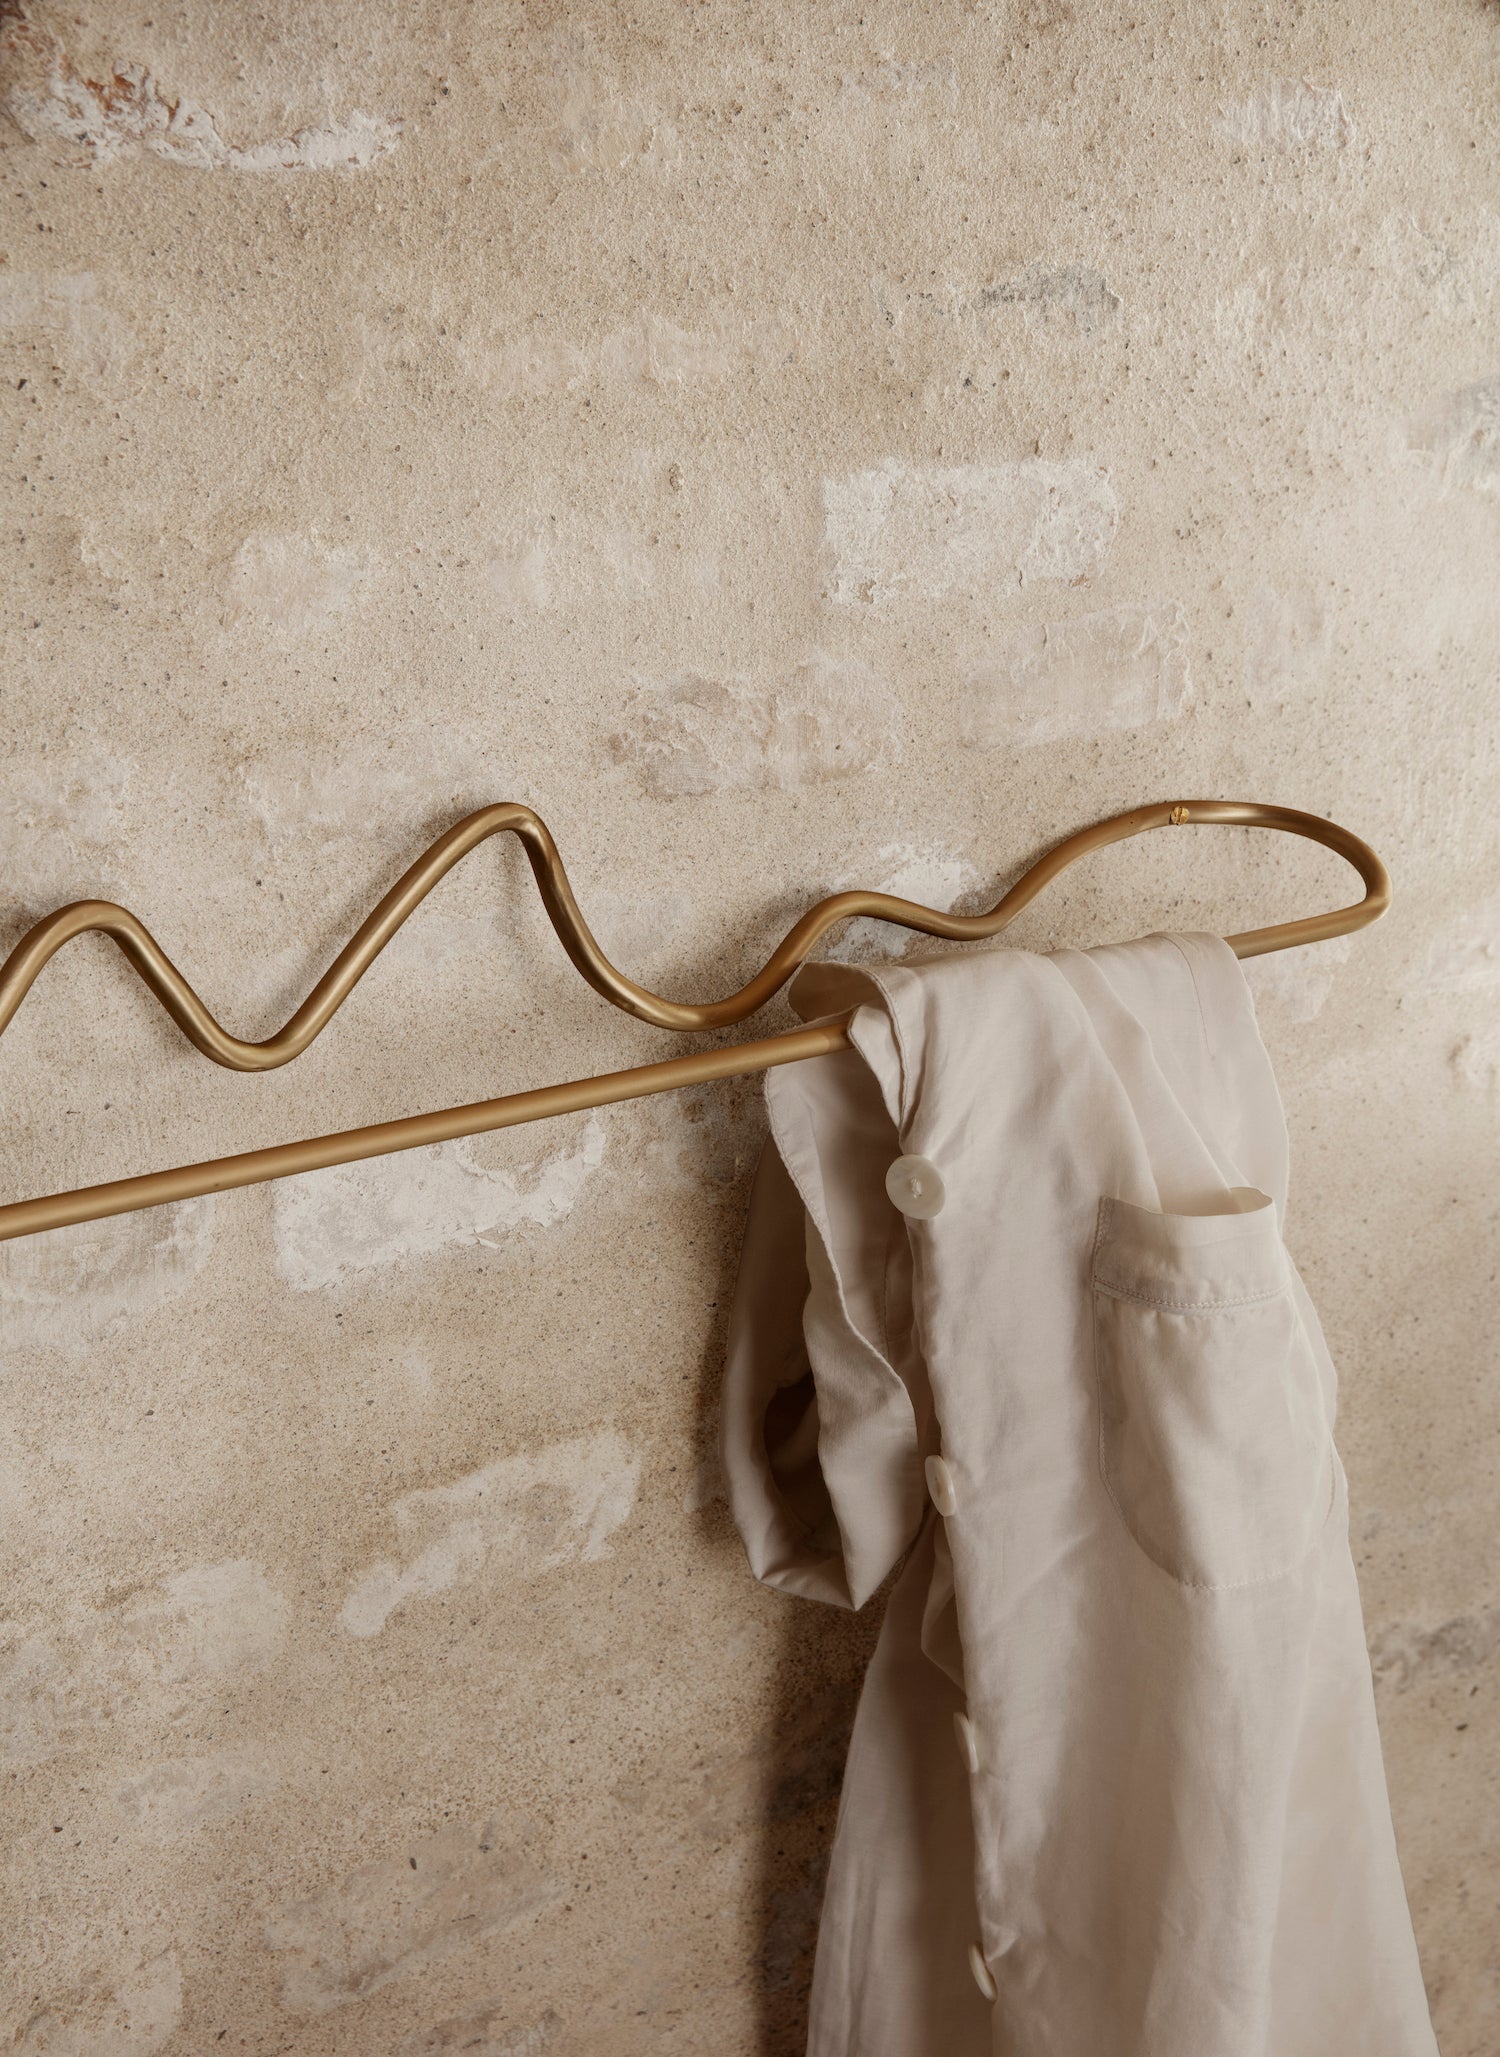 Curvature Towel Hanger. Organically shaped hardware for the bathroom hand formed in pure, solid brass with a matte finish.